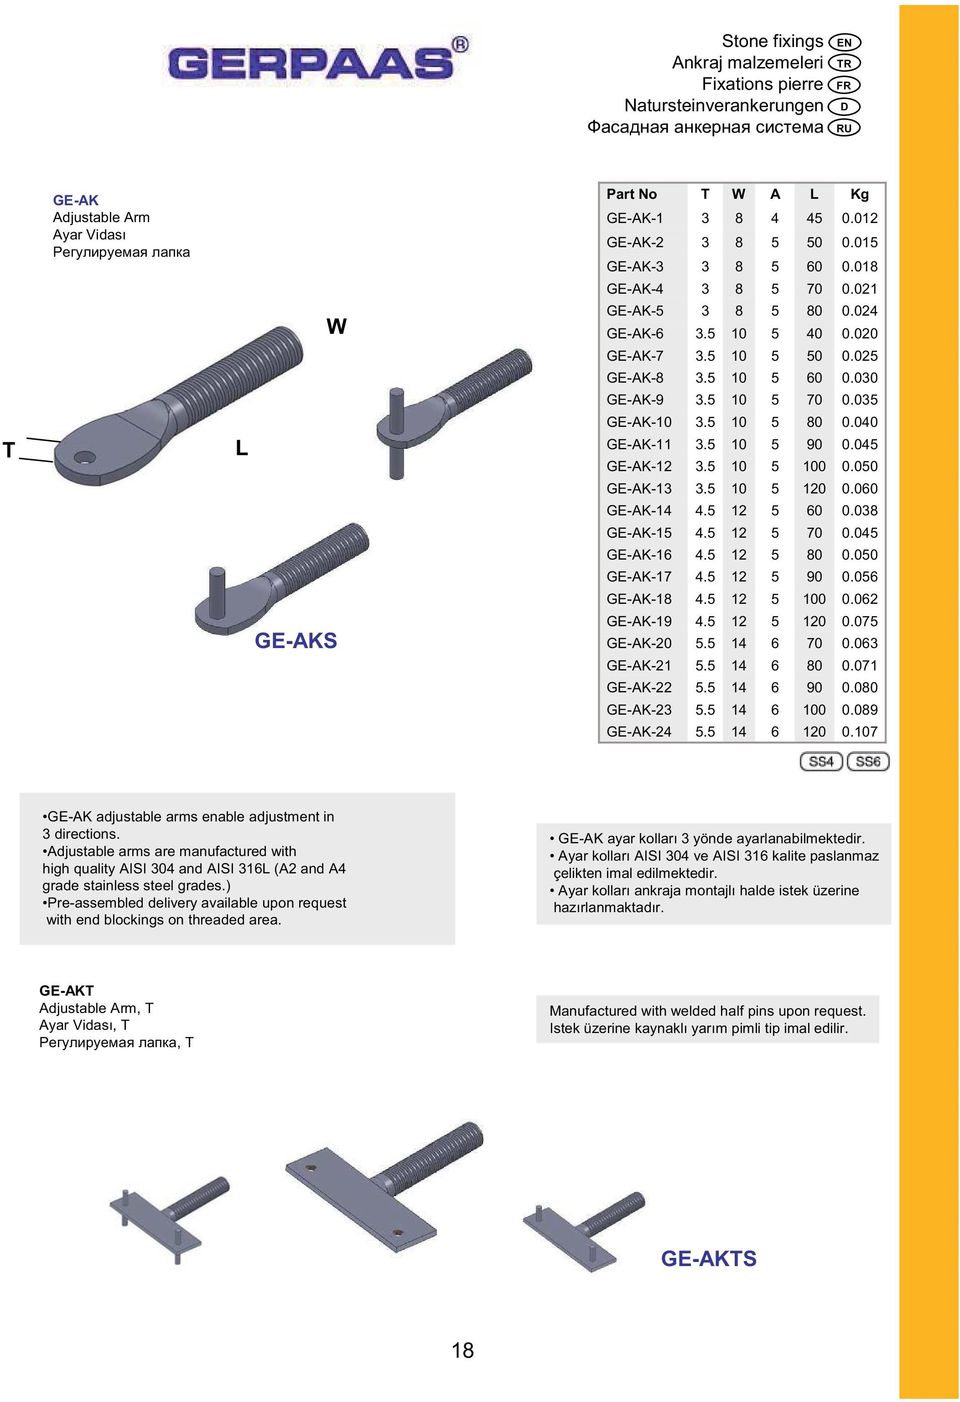 GE-K adjustable arms enable adjustment in directions. djustable arms are manufactured with high quality ISI 0 and ISI 1 ( and grade stainless steel grades.